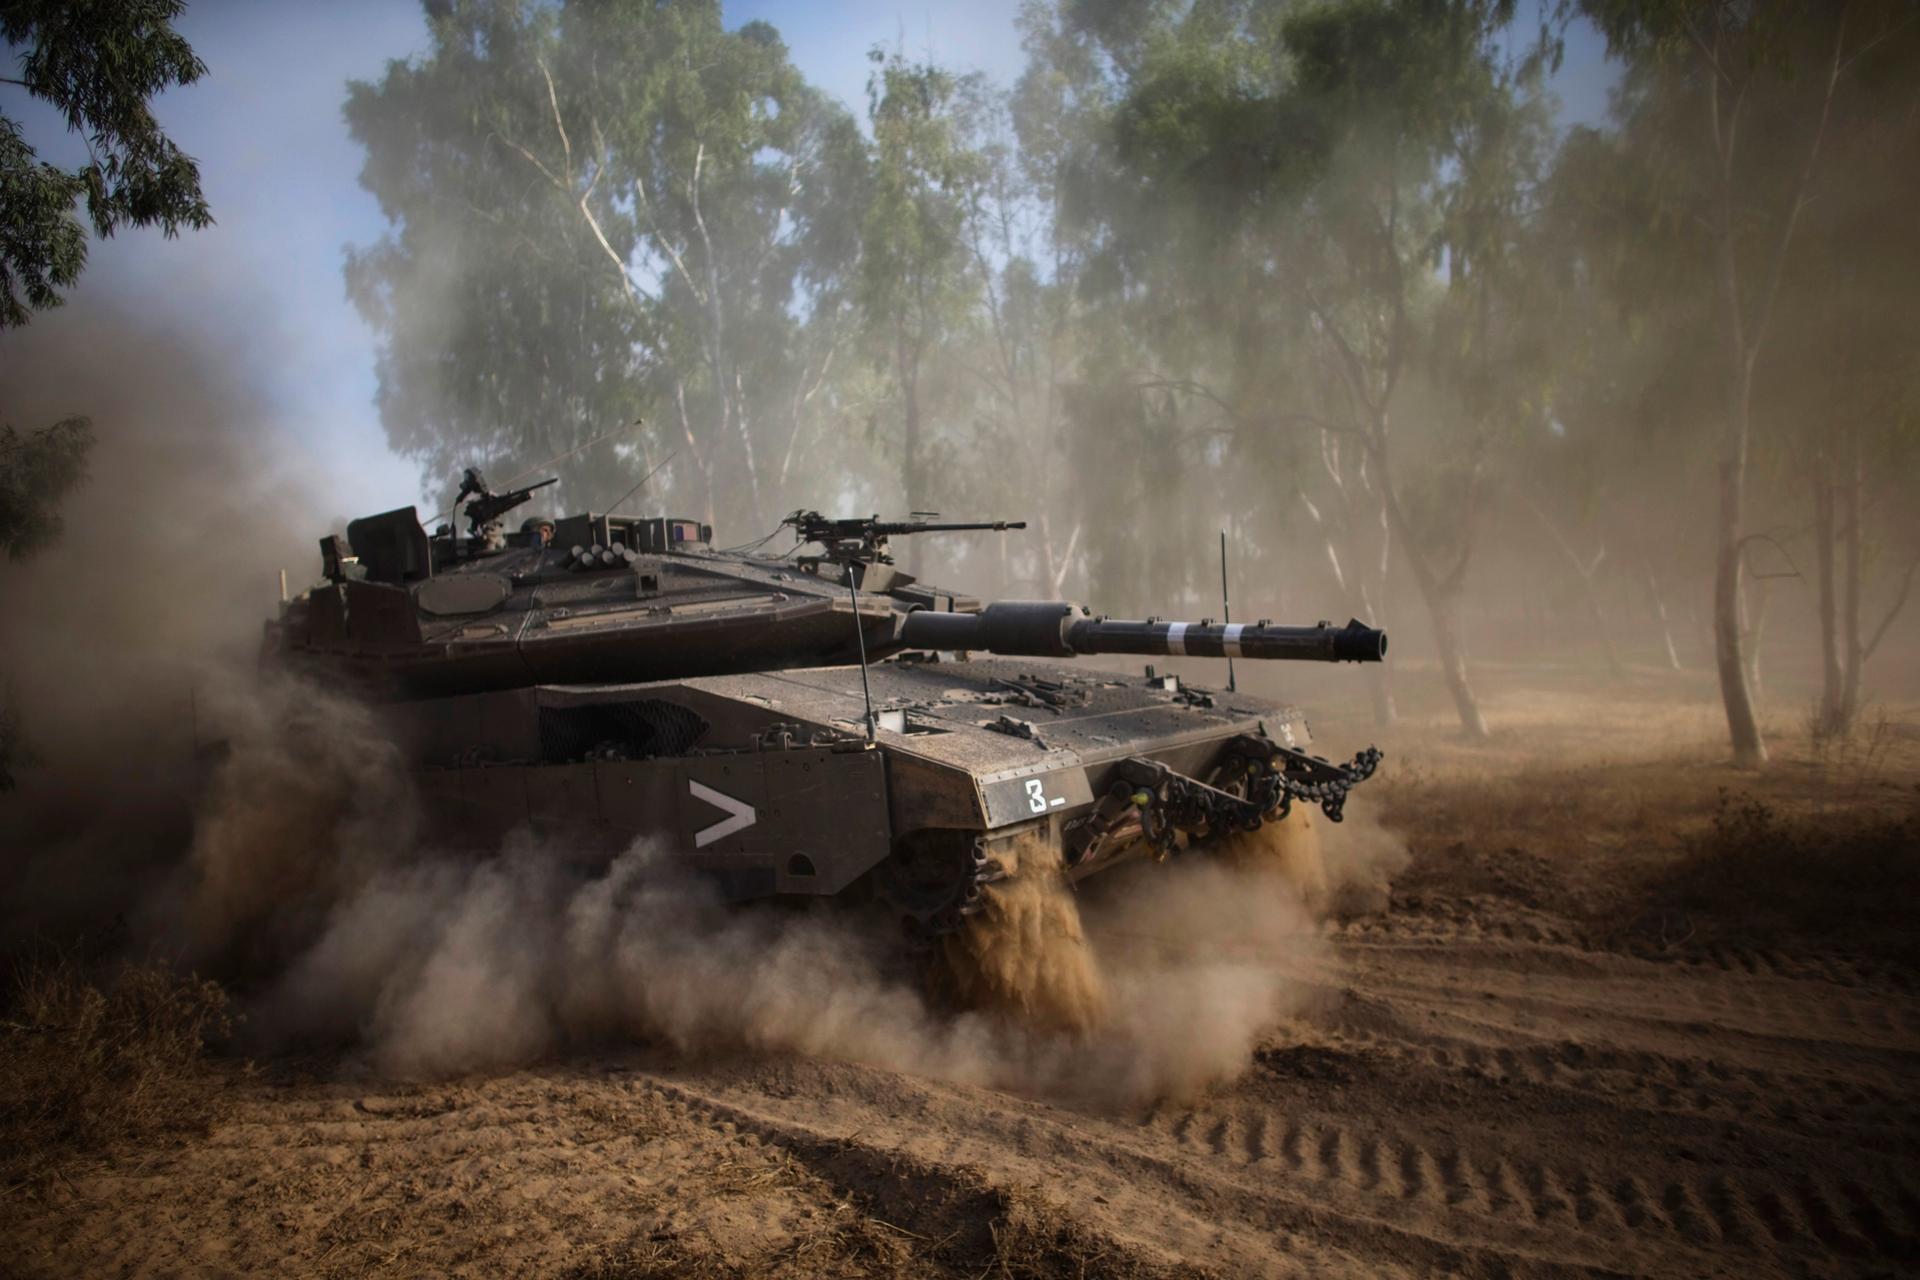 An Israeli tank performs a maneuver after the end of a five-hour humanitarian truce, near the border with the Gaza Strip. Israeli leaders ordered a ground operation in Gaza soon after the temporary ceasefire, which was not honored by Palestinian militant